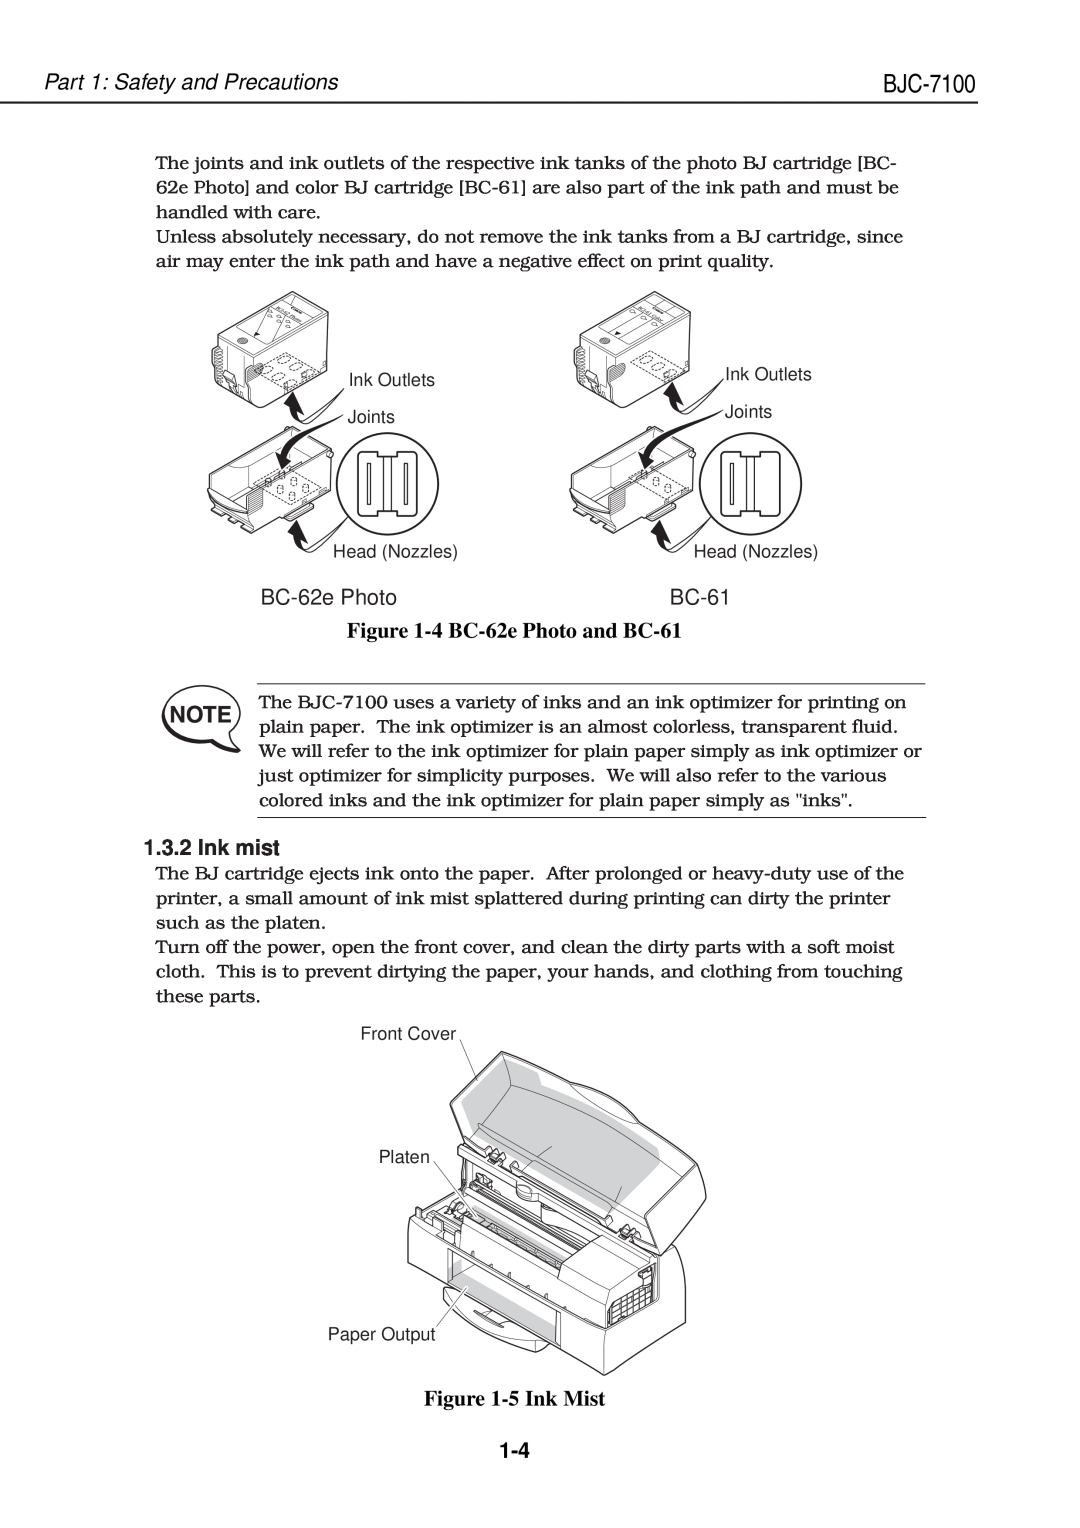 Canon QY8-1360-000 manual 4 BC-62e Photo and BC-61, Ink mist, 5 Ink Mist, Part 1 Safety and Precautions, BJC-7100 